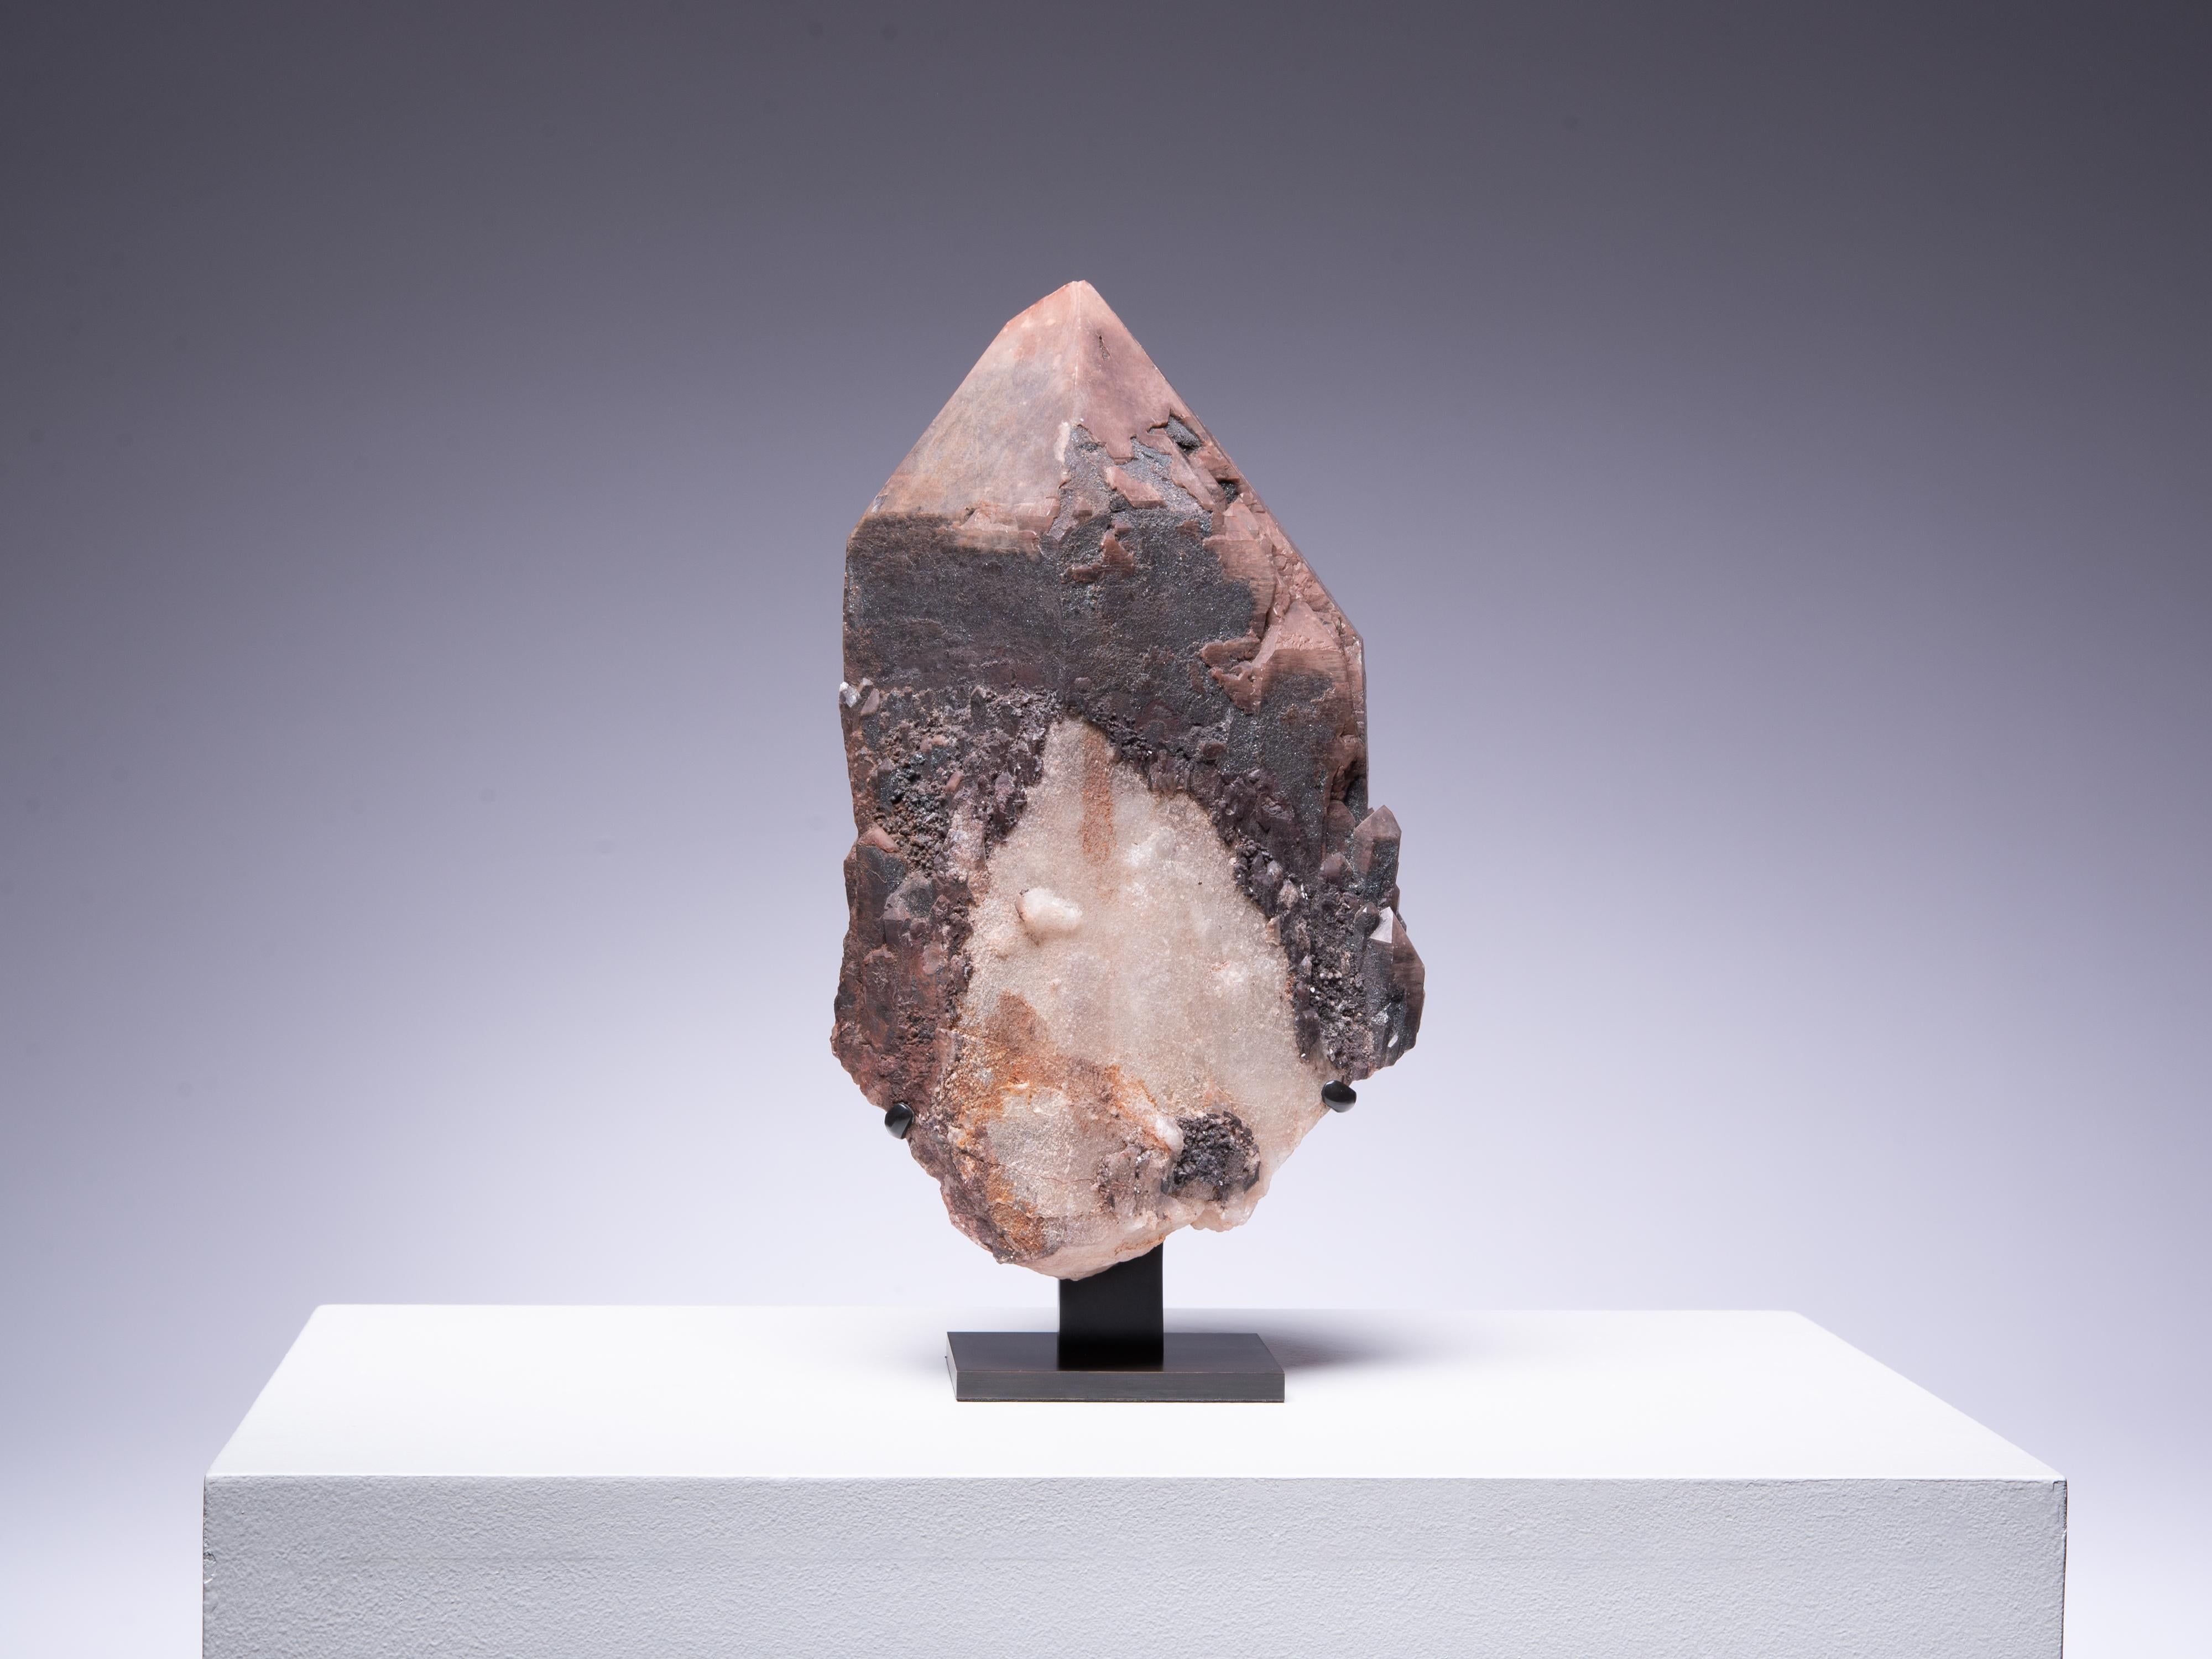 A sculptural piece of smoky quartz with haematite inclusions and iron
oxide coating. Part of a striking new discovery from Amazonia that has been referred to as 